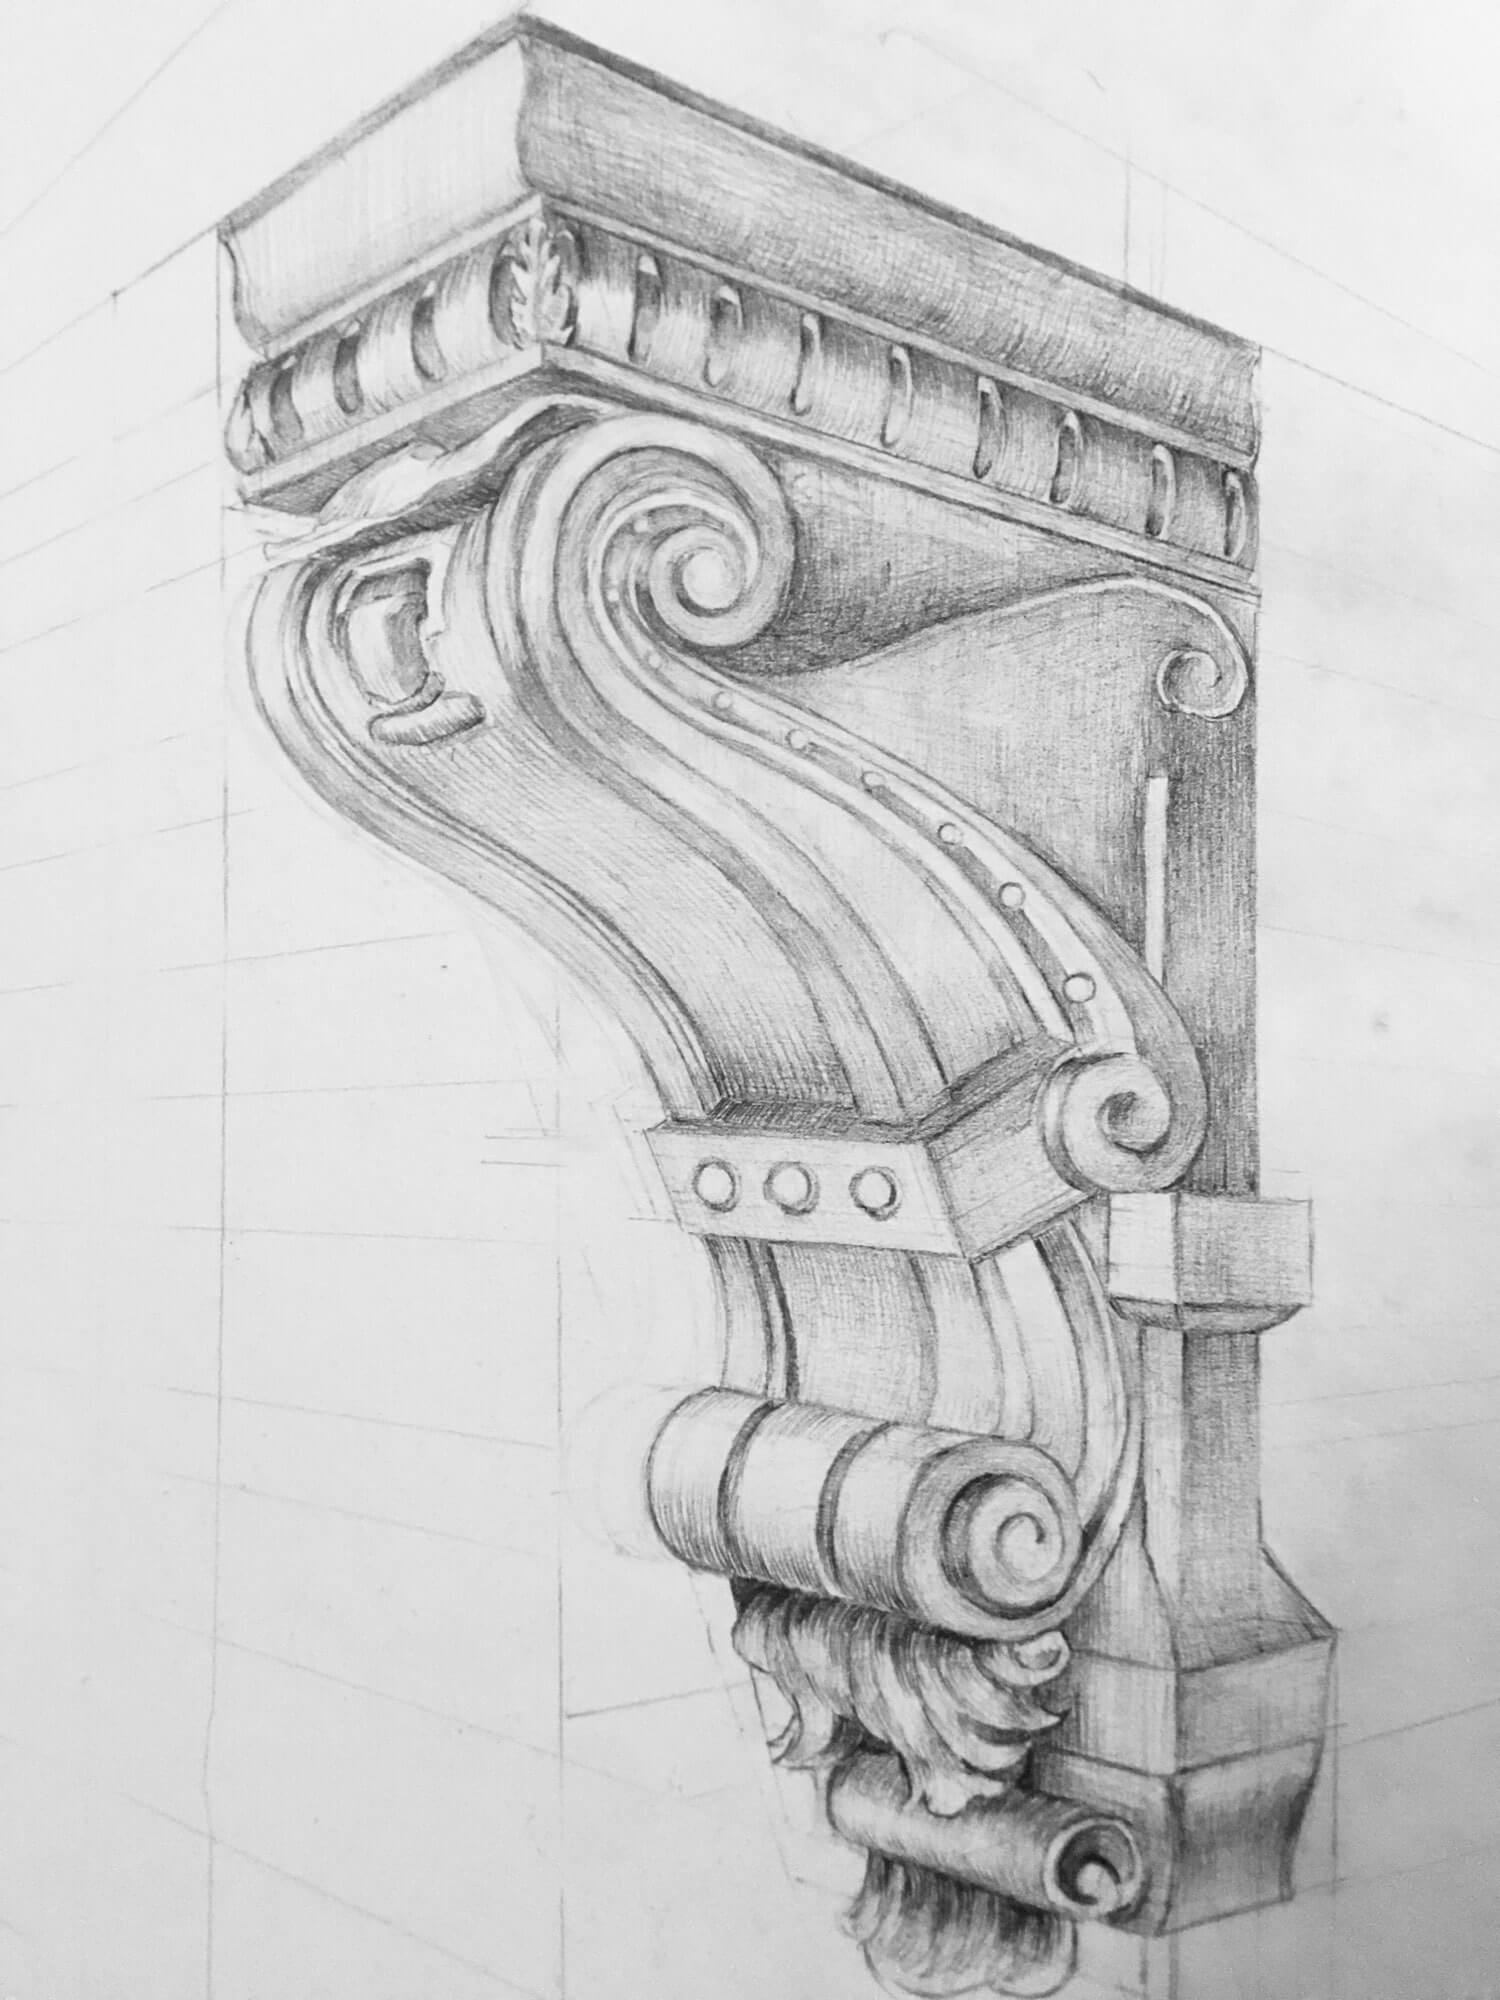 Sketch of a pillar with fancy architecture.